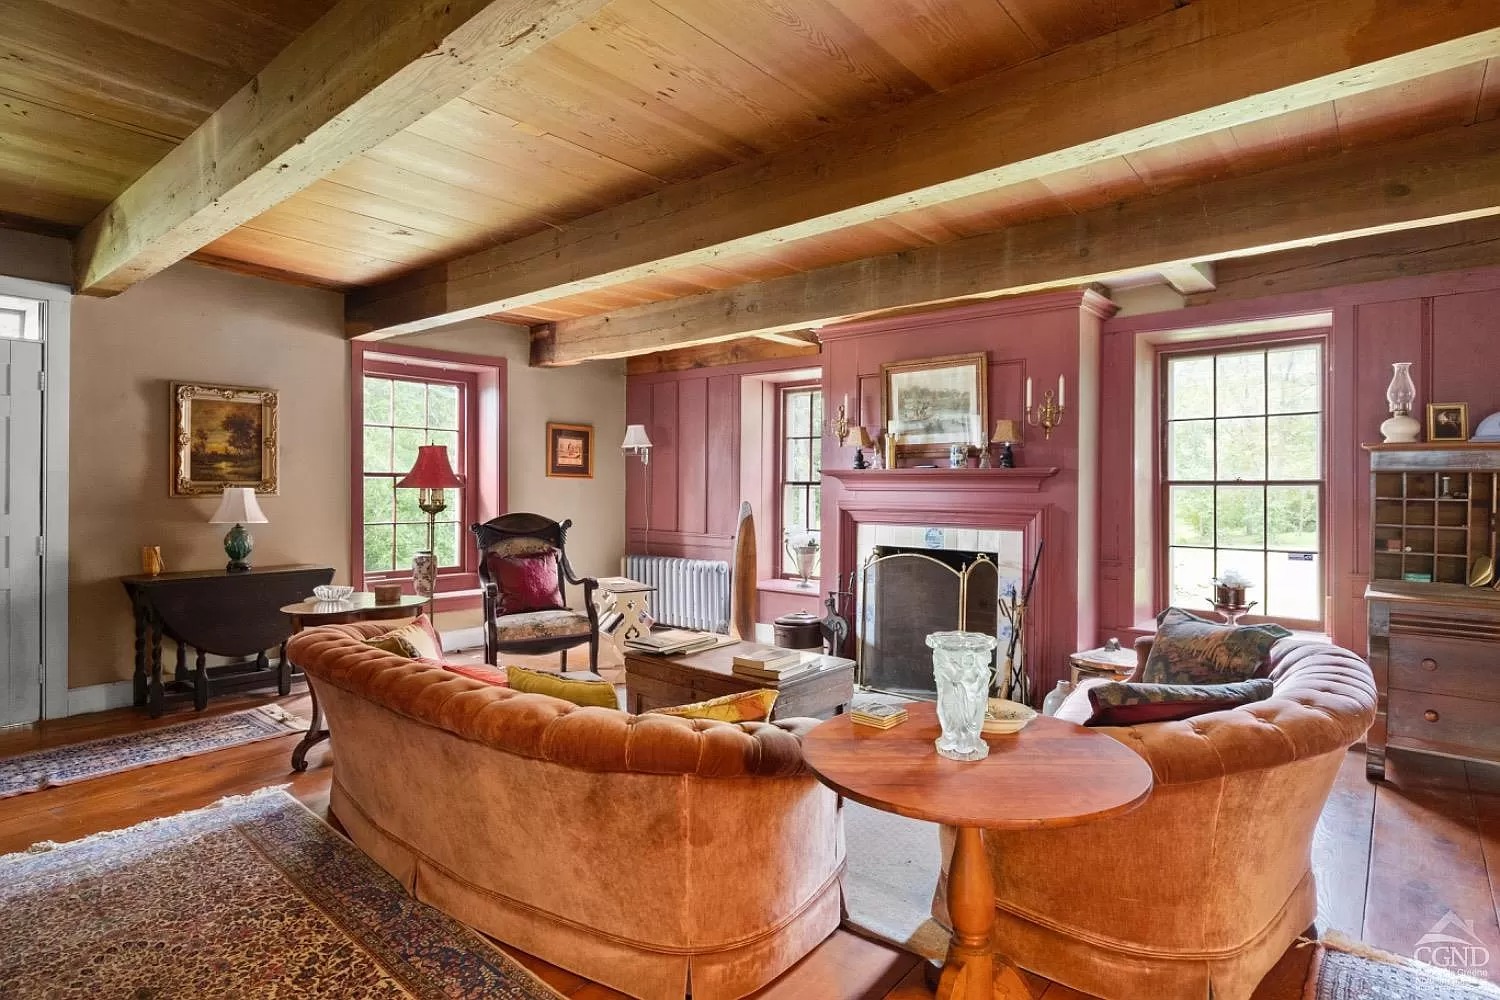 Exposed ceiling beams mark Colonial time of stone house